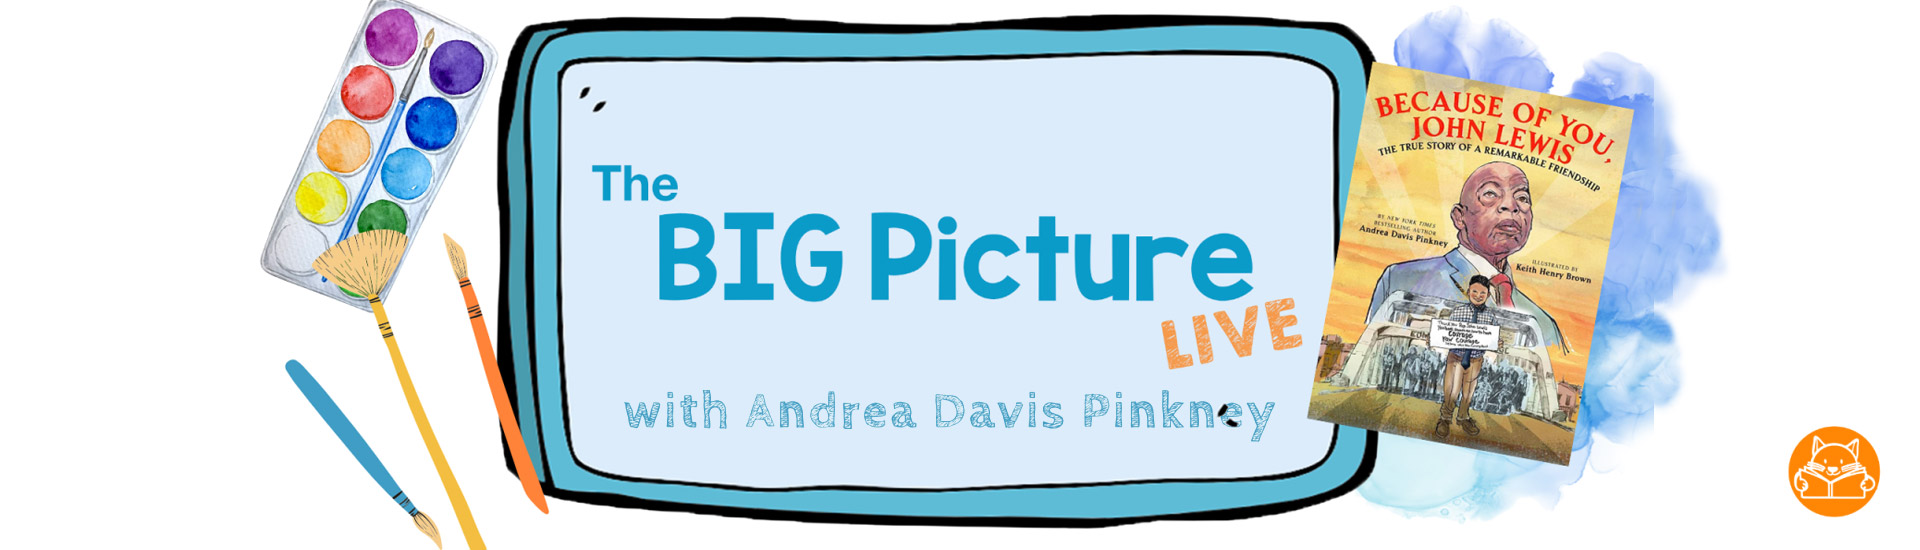 The Big Picture With Andrea Davis Pinkney